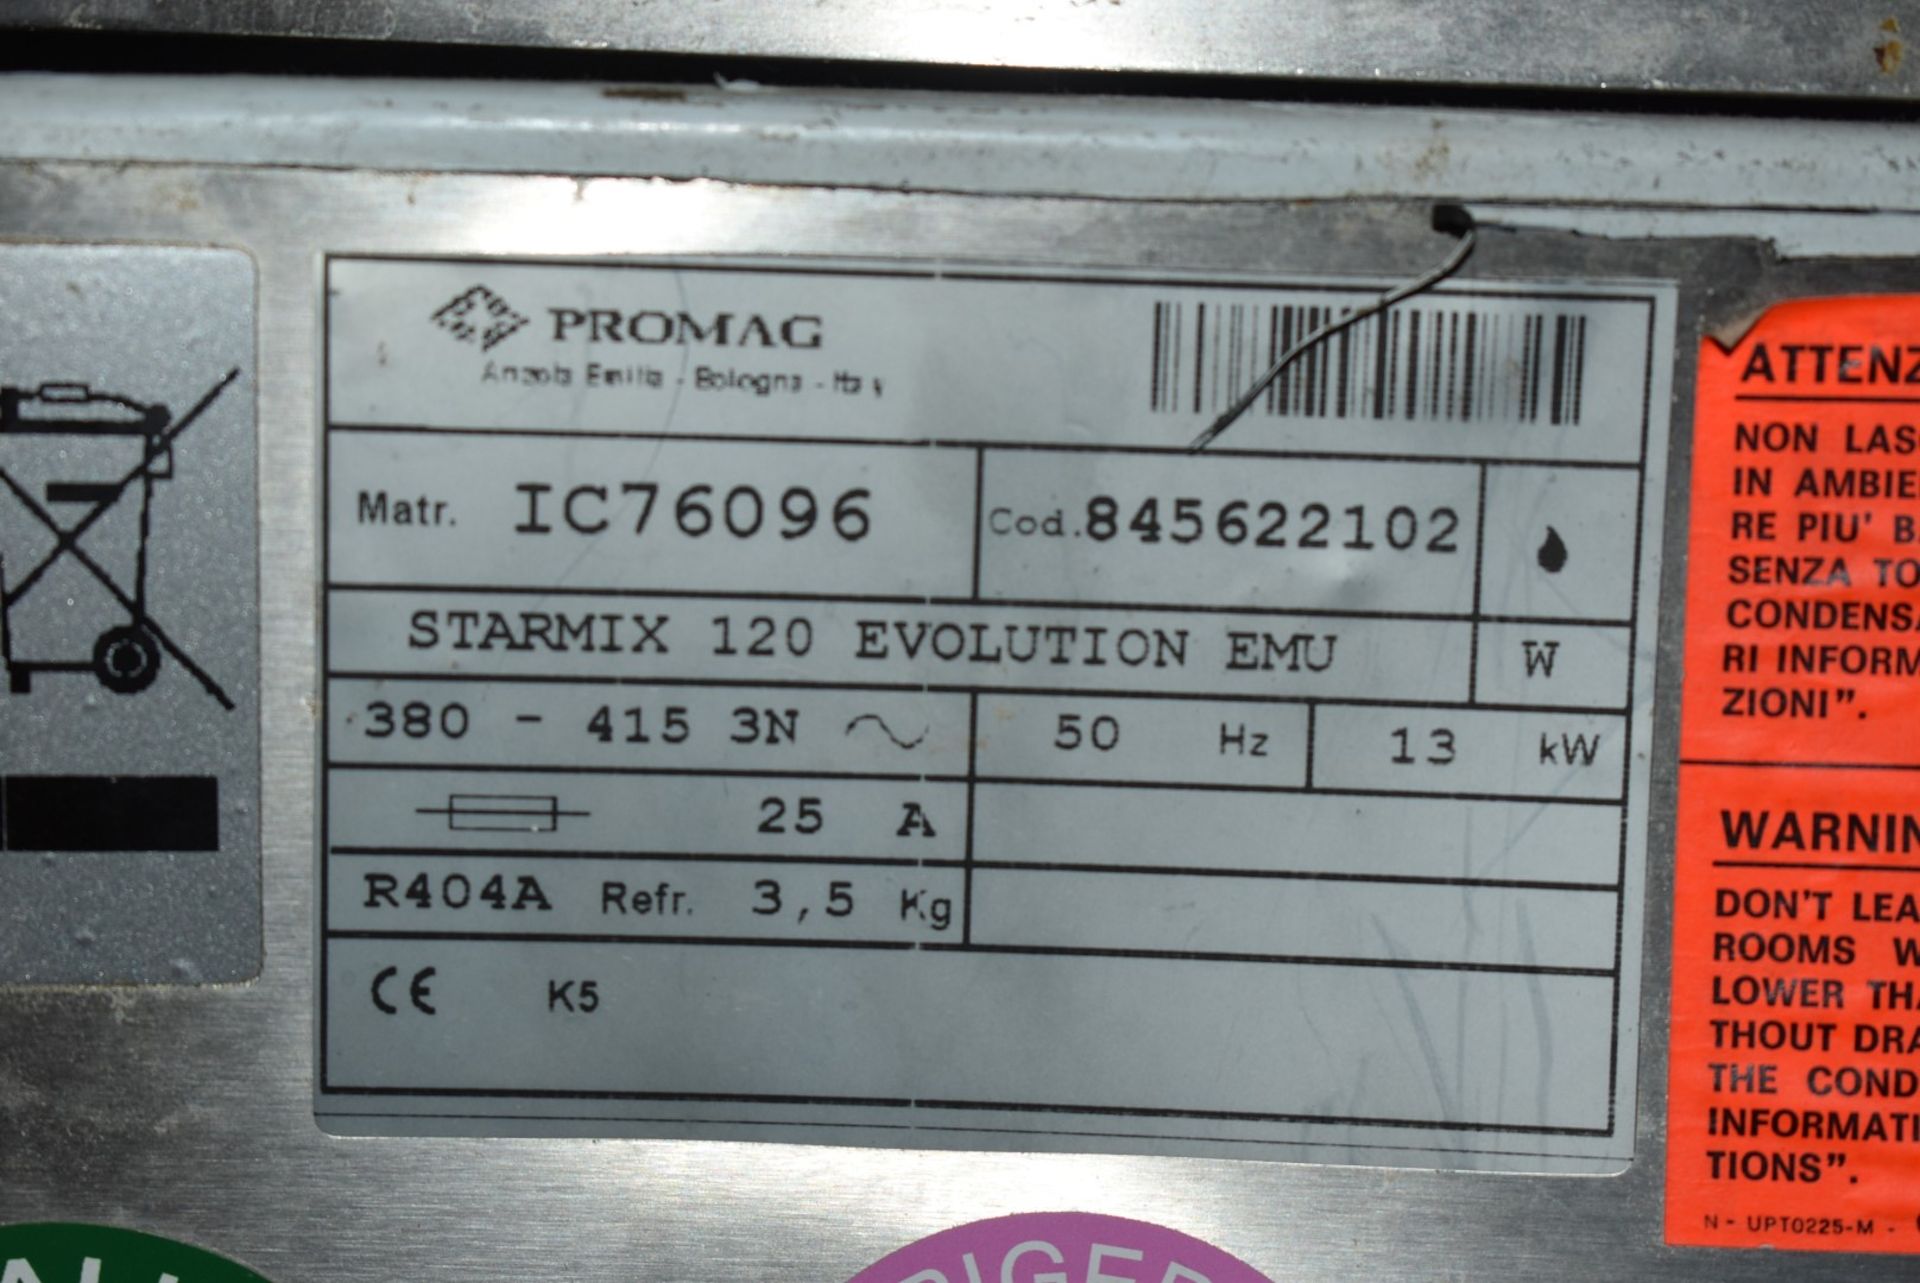 1 x Promag Starmix 120 Ice Cream Batch Pasteuriser - CL987 - Made in Italy - 3 Phase - Ref LCM281 - Image 3 of 17